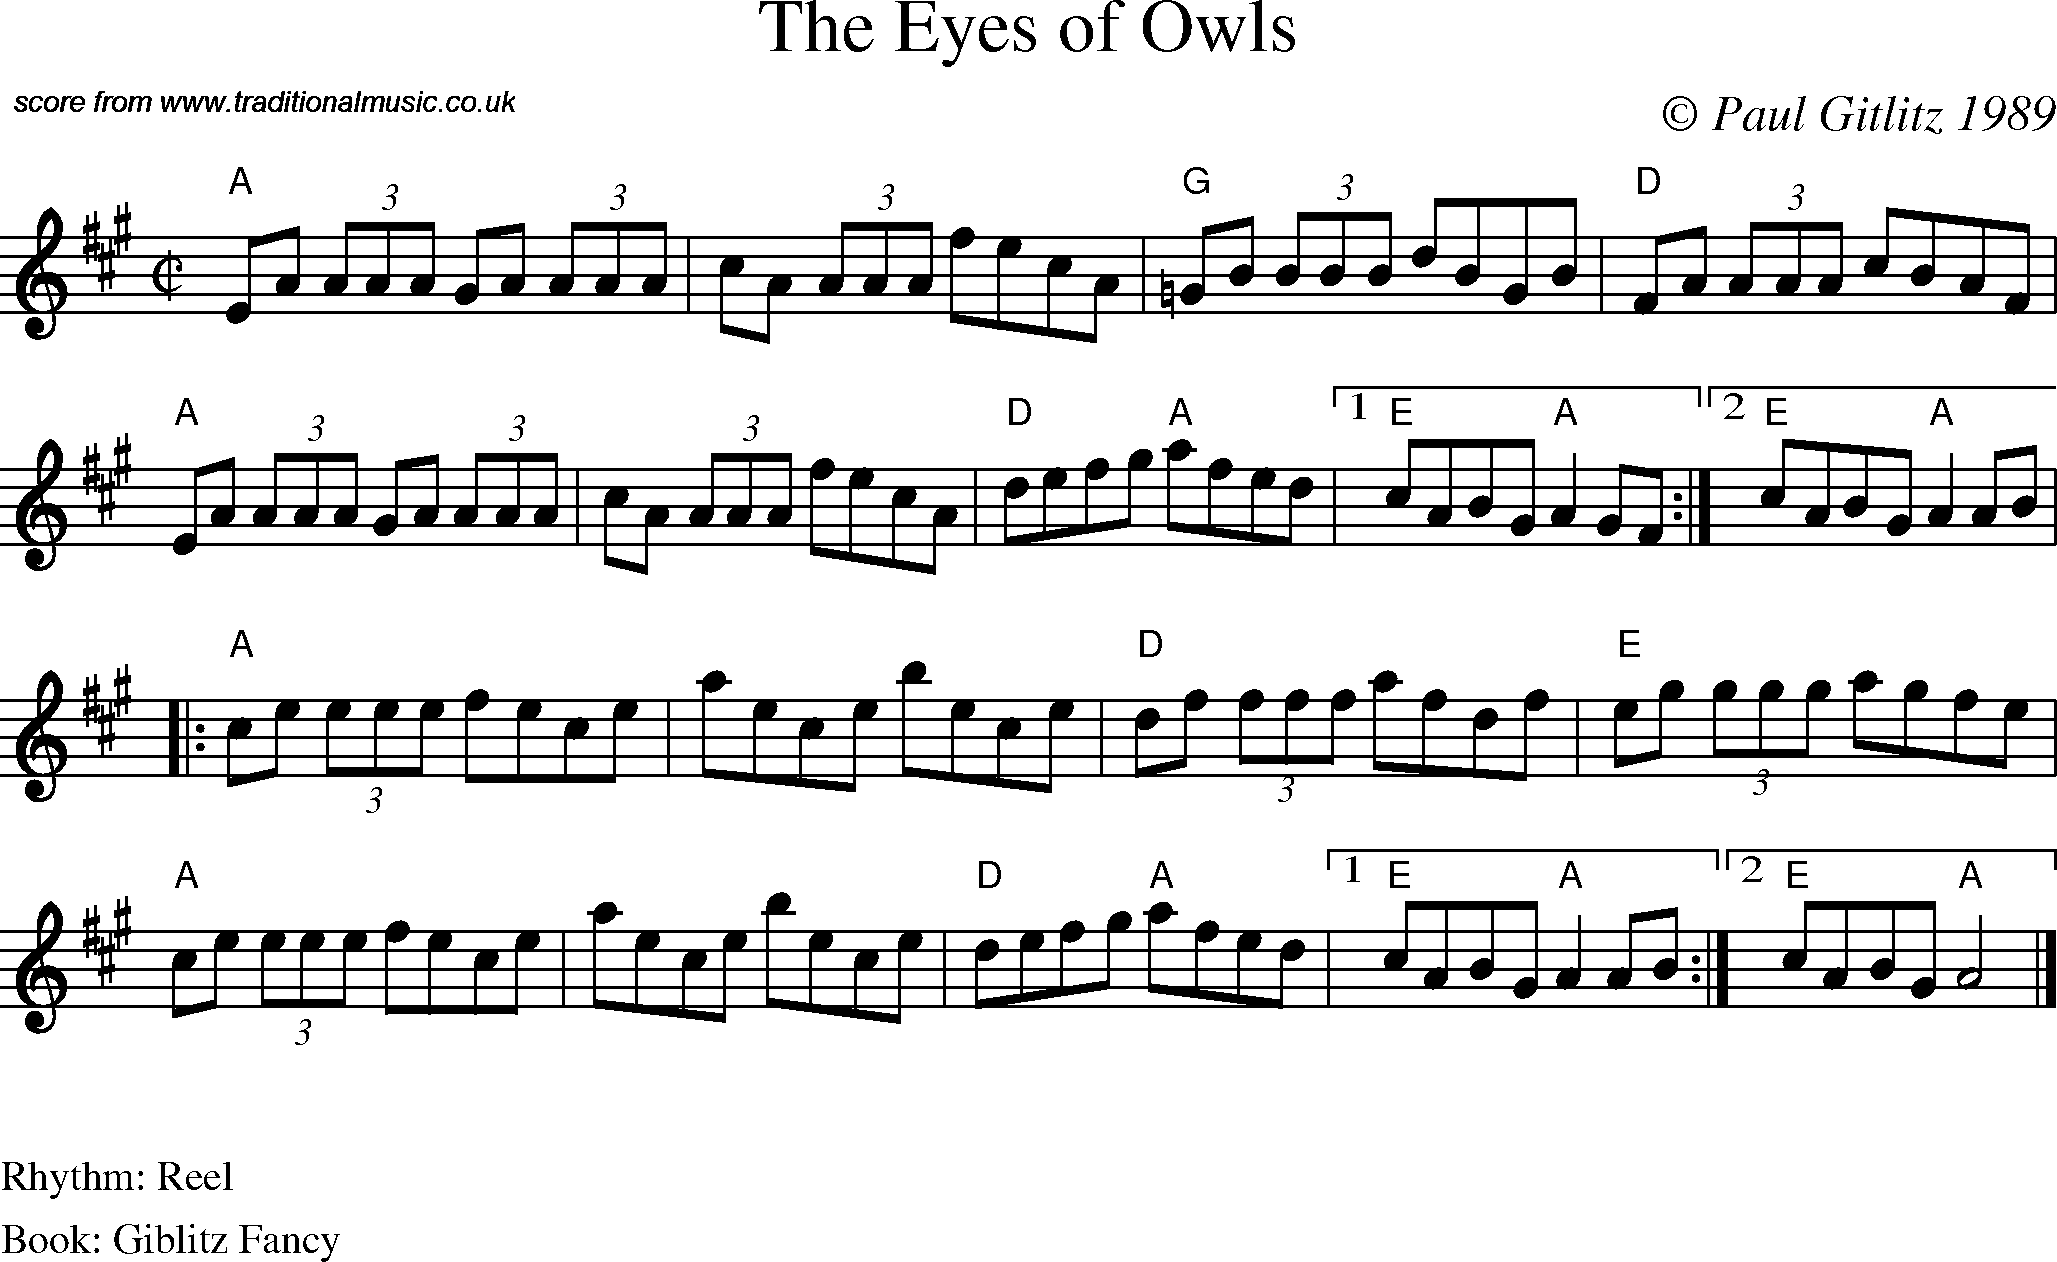 Sheet Music Score for Reel - The Eyes of Owls